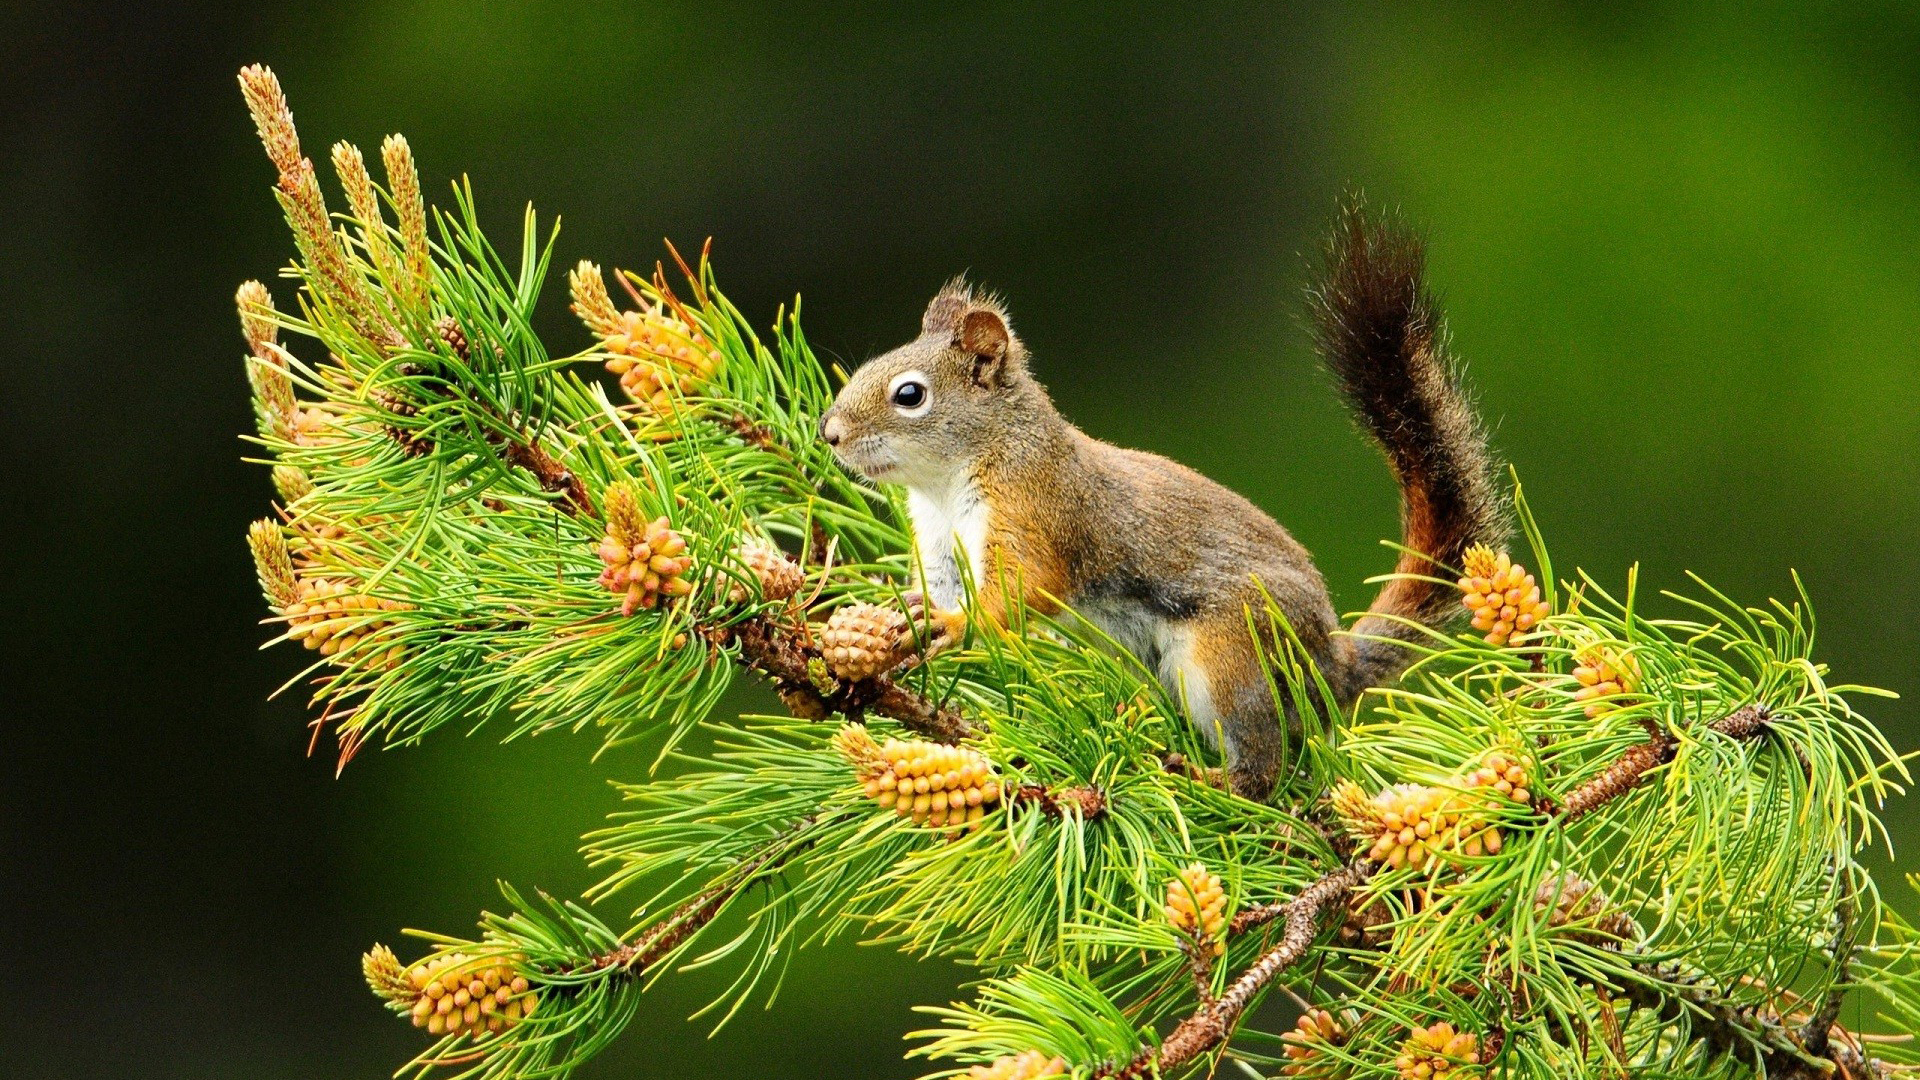 Squirrel Is Sitting On Tree Branch In Green Wallpaper 2K Squirrel